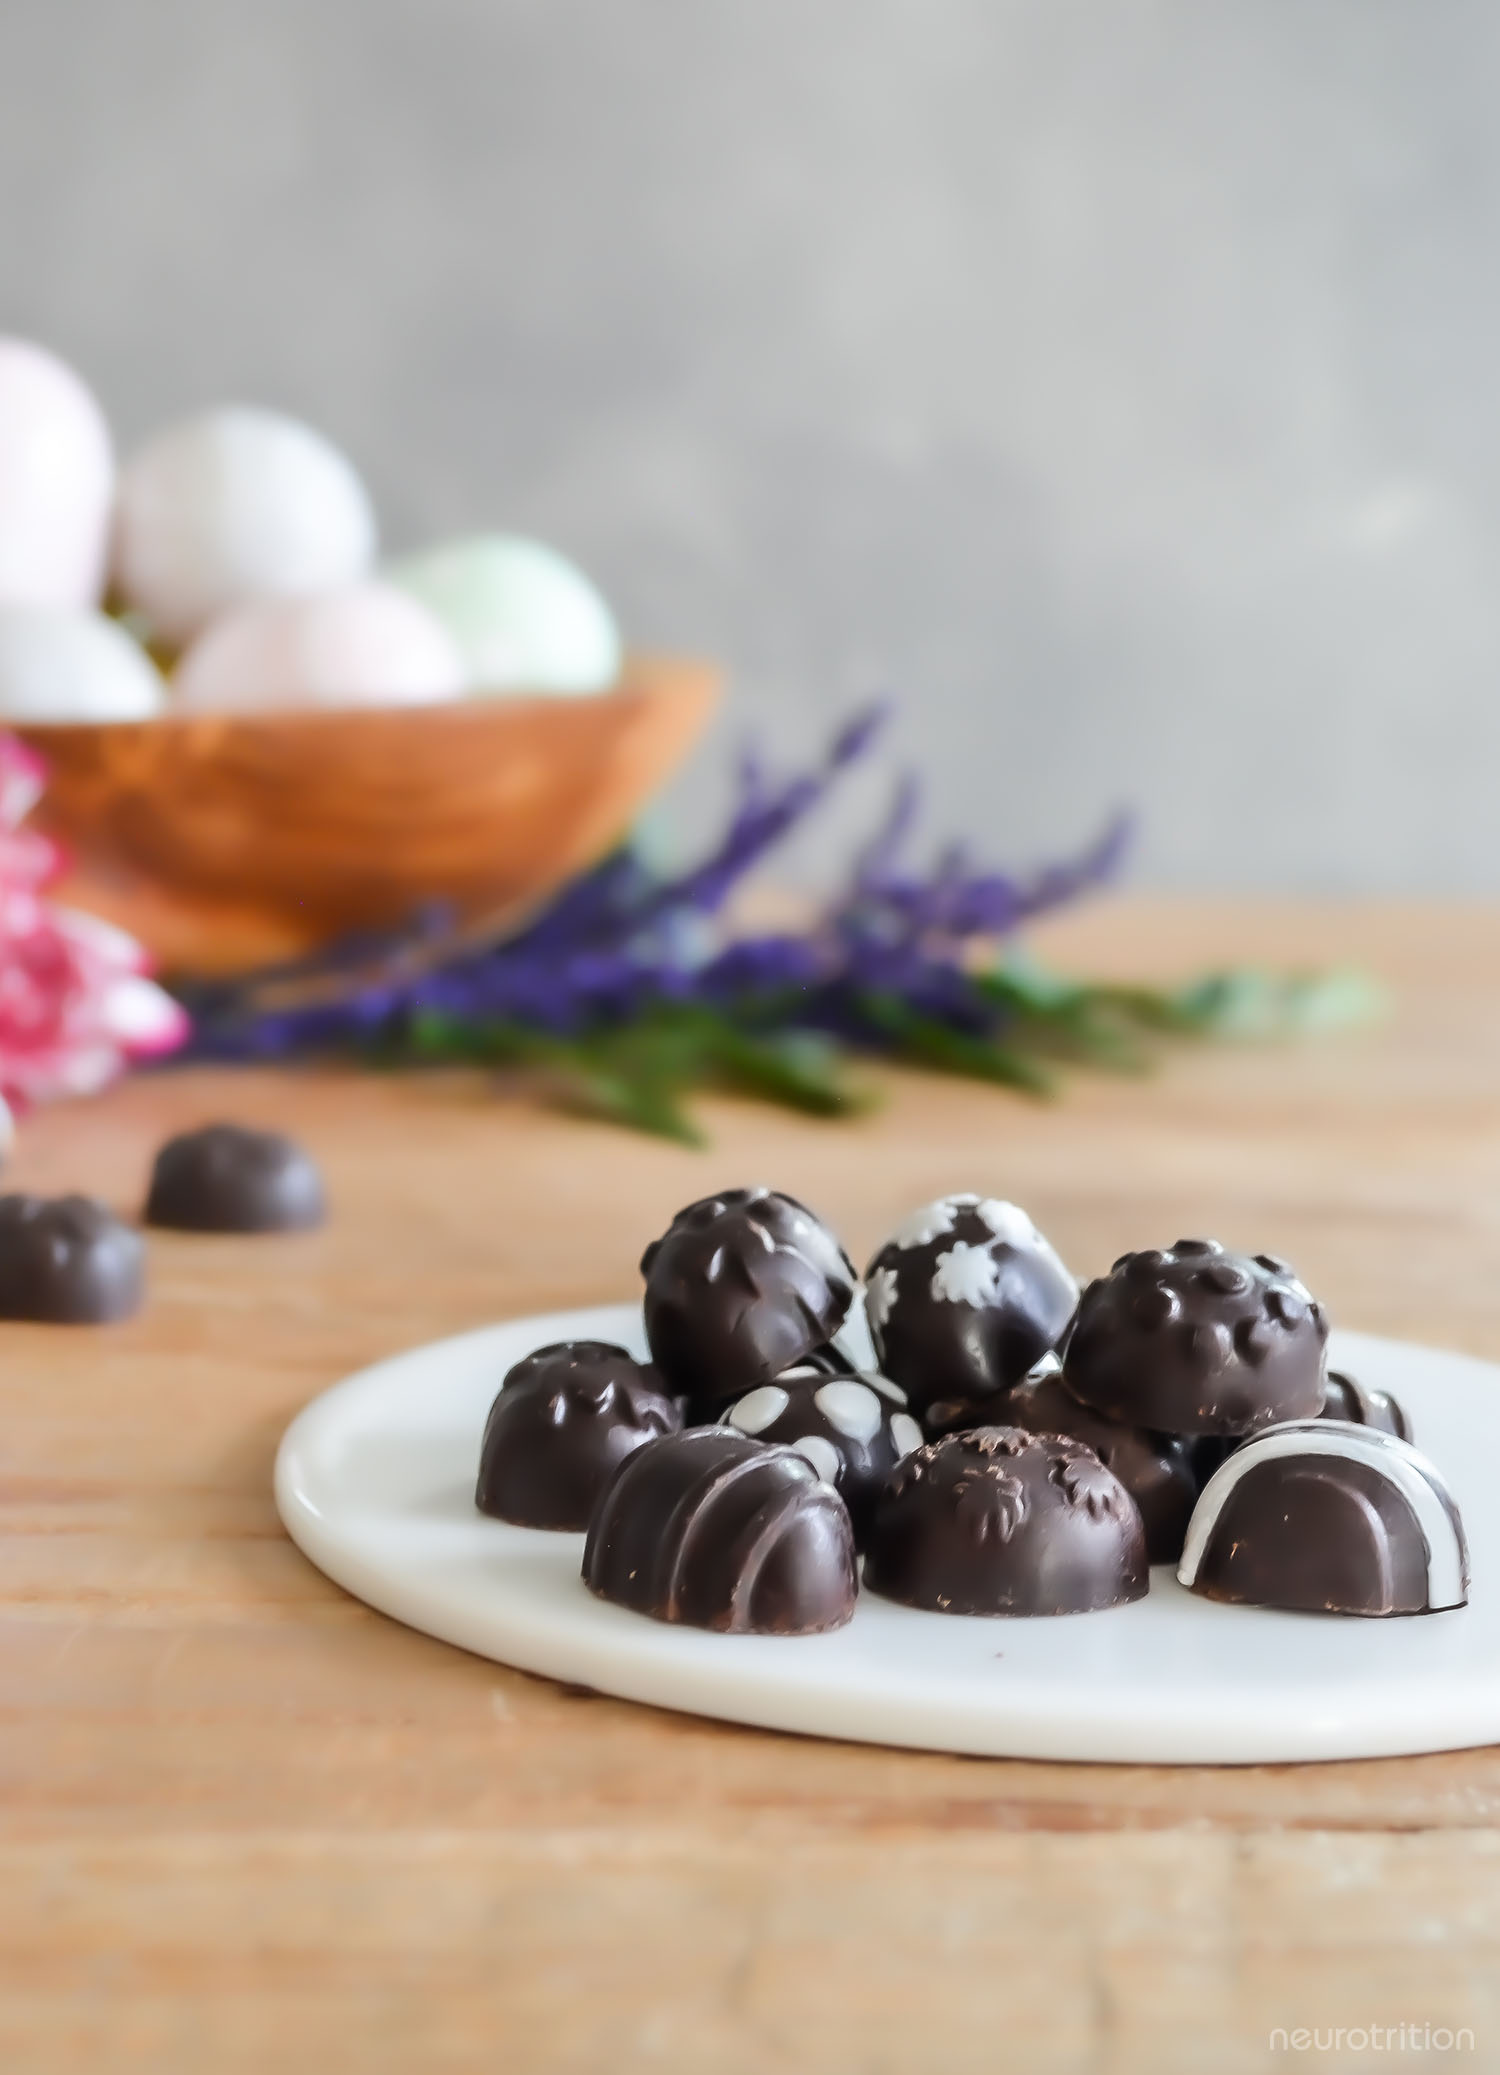 A pile of homemade chocolate Easter eggs with decorative white icing, on a white plate.